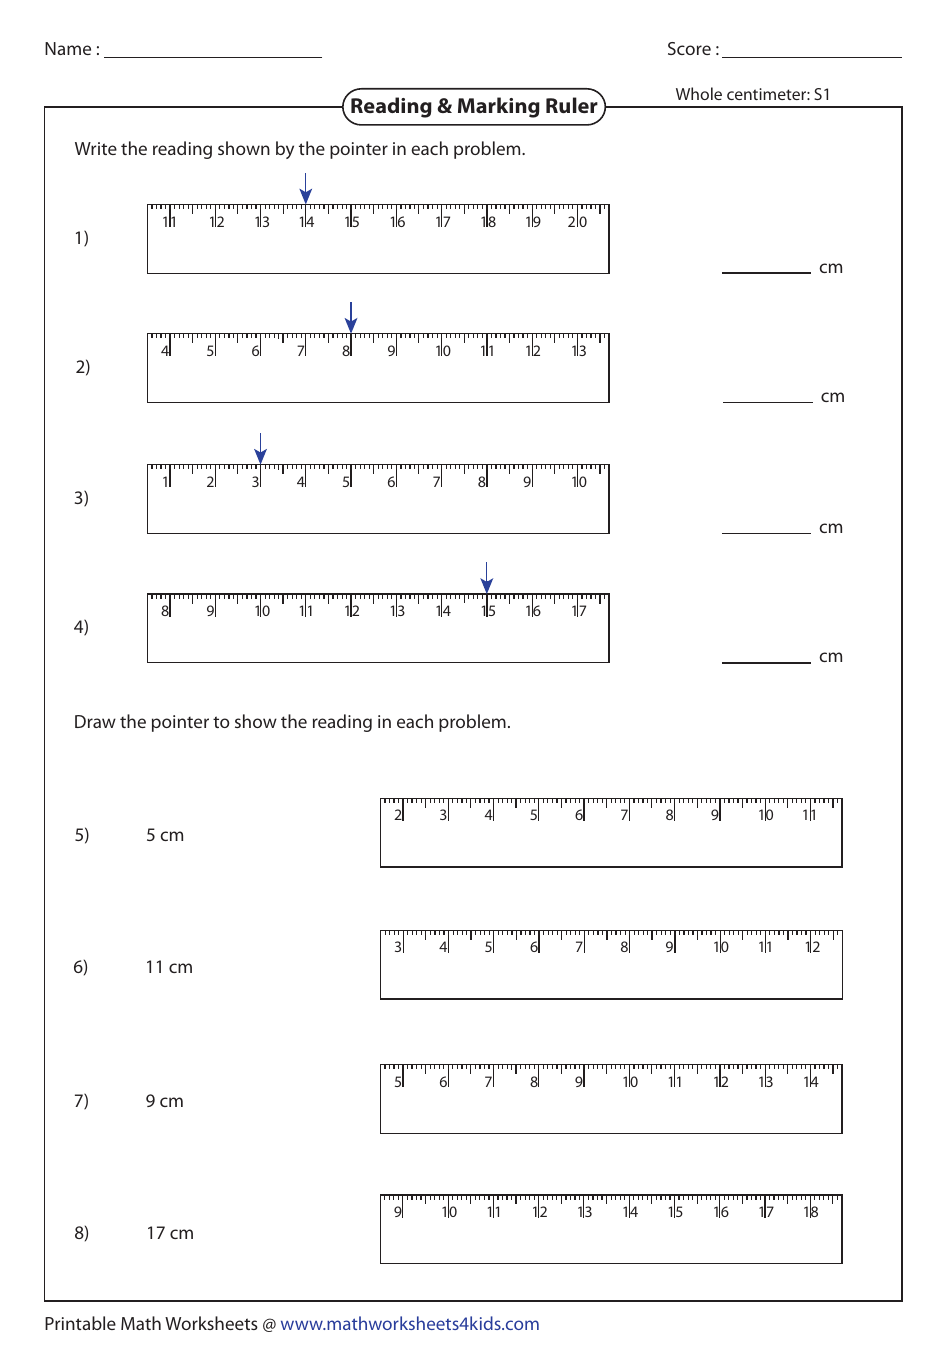 Reading & Marking Ruler Worksheet With Answer Key Download ...